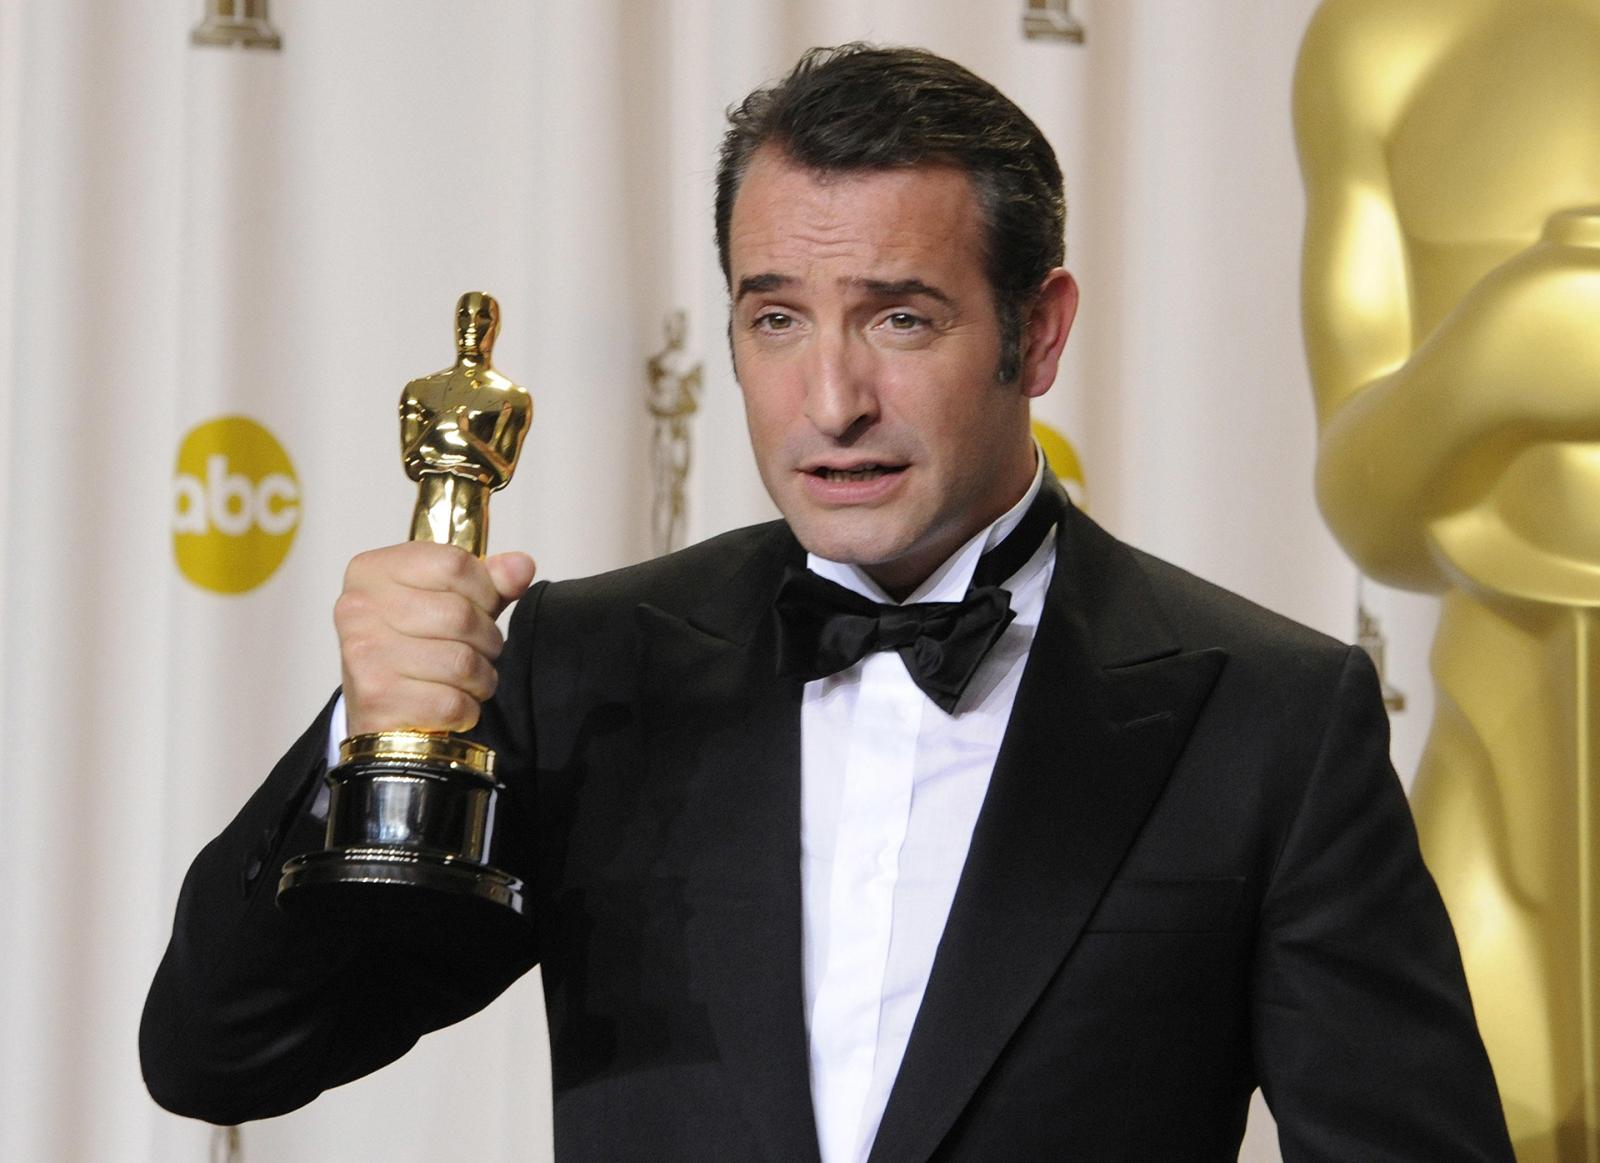 The Oscars Curse: 8 Actors Whose Career Went Down the Drain After Winning - image 4